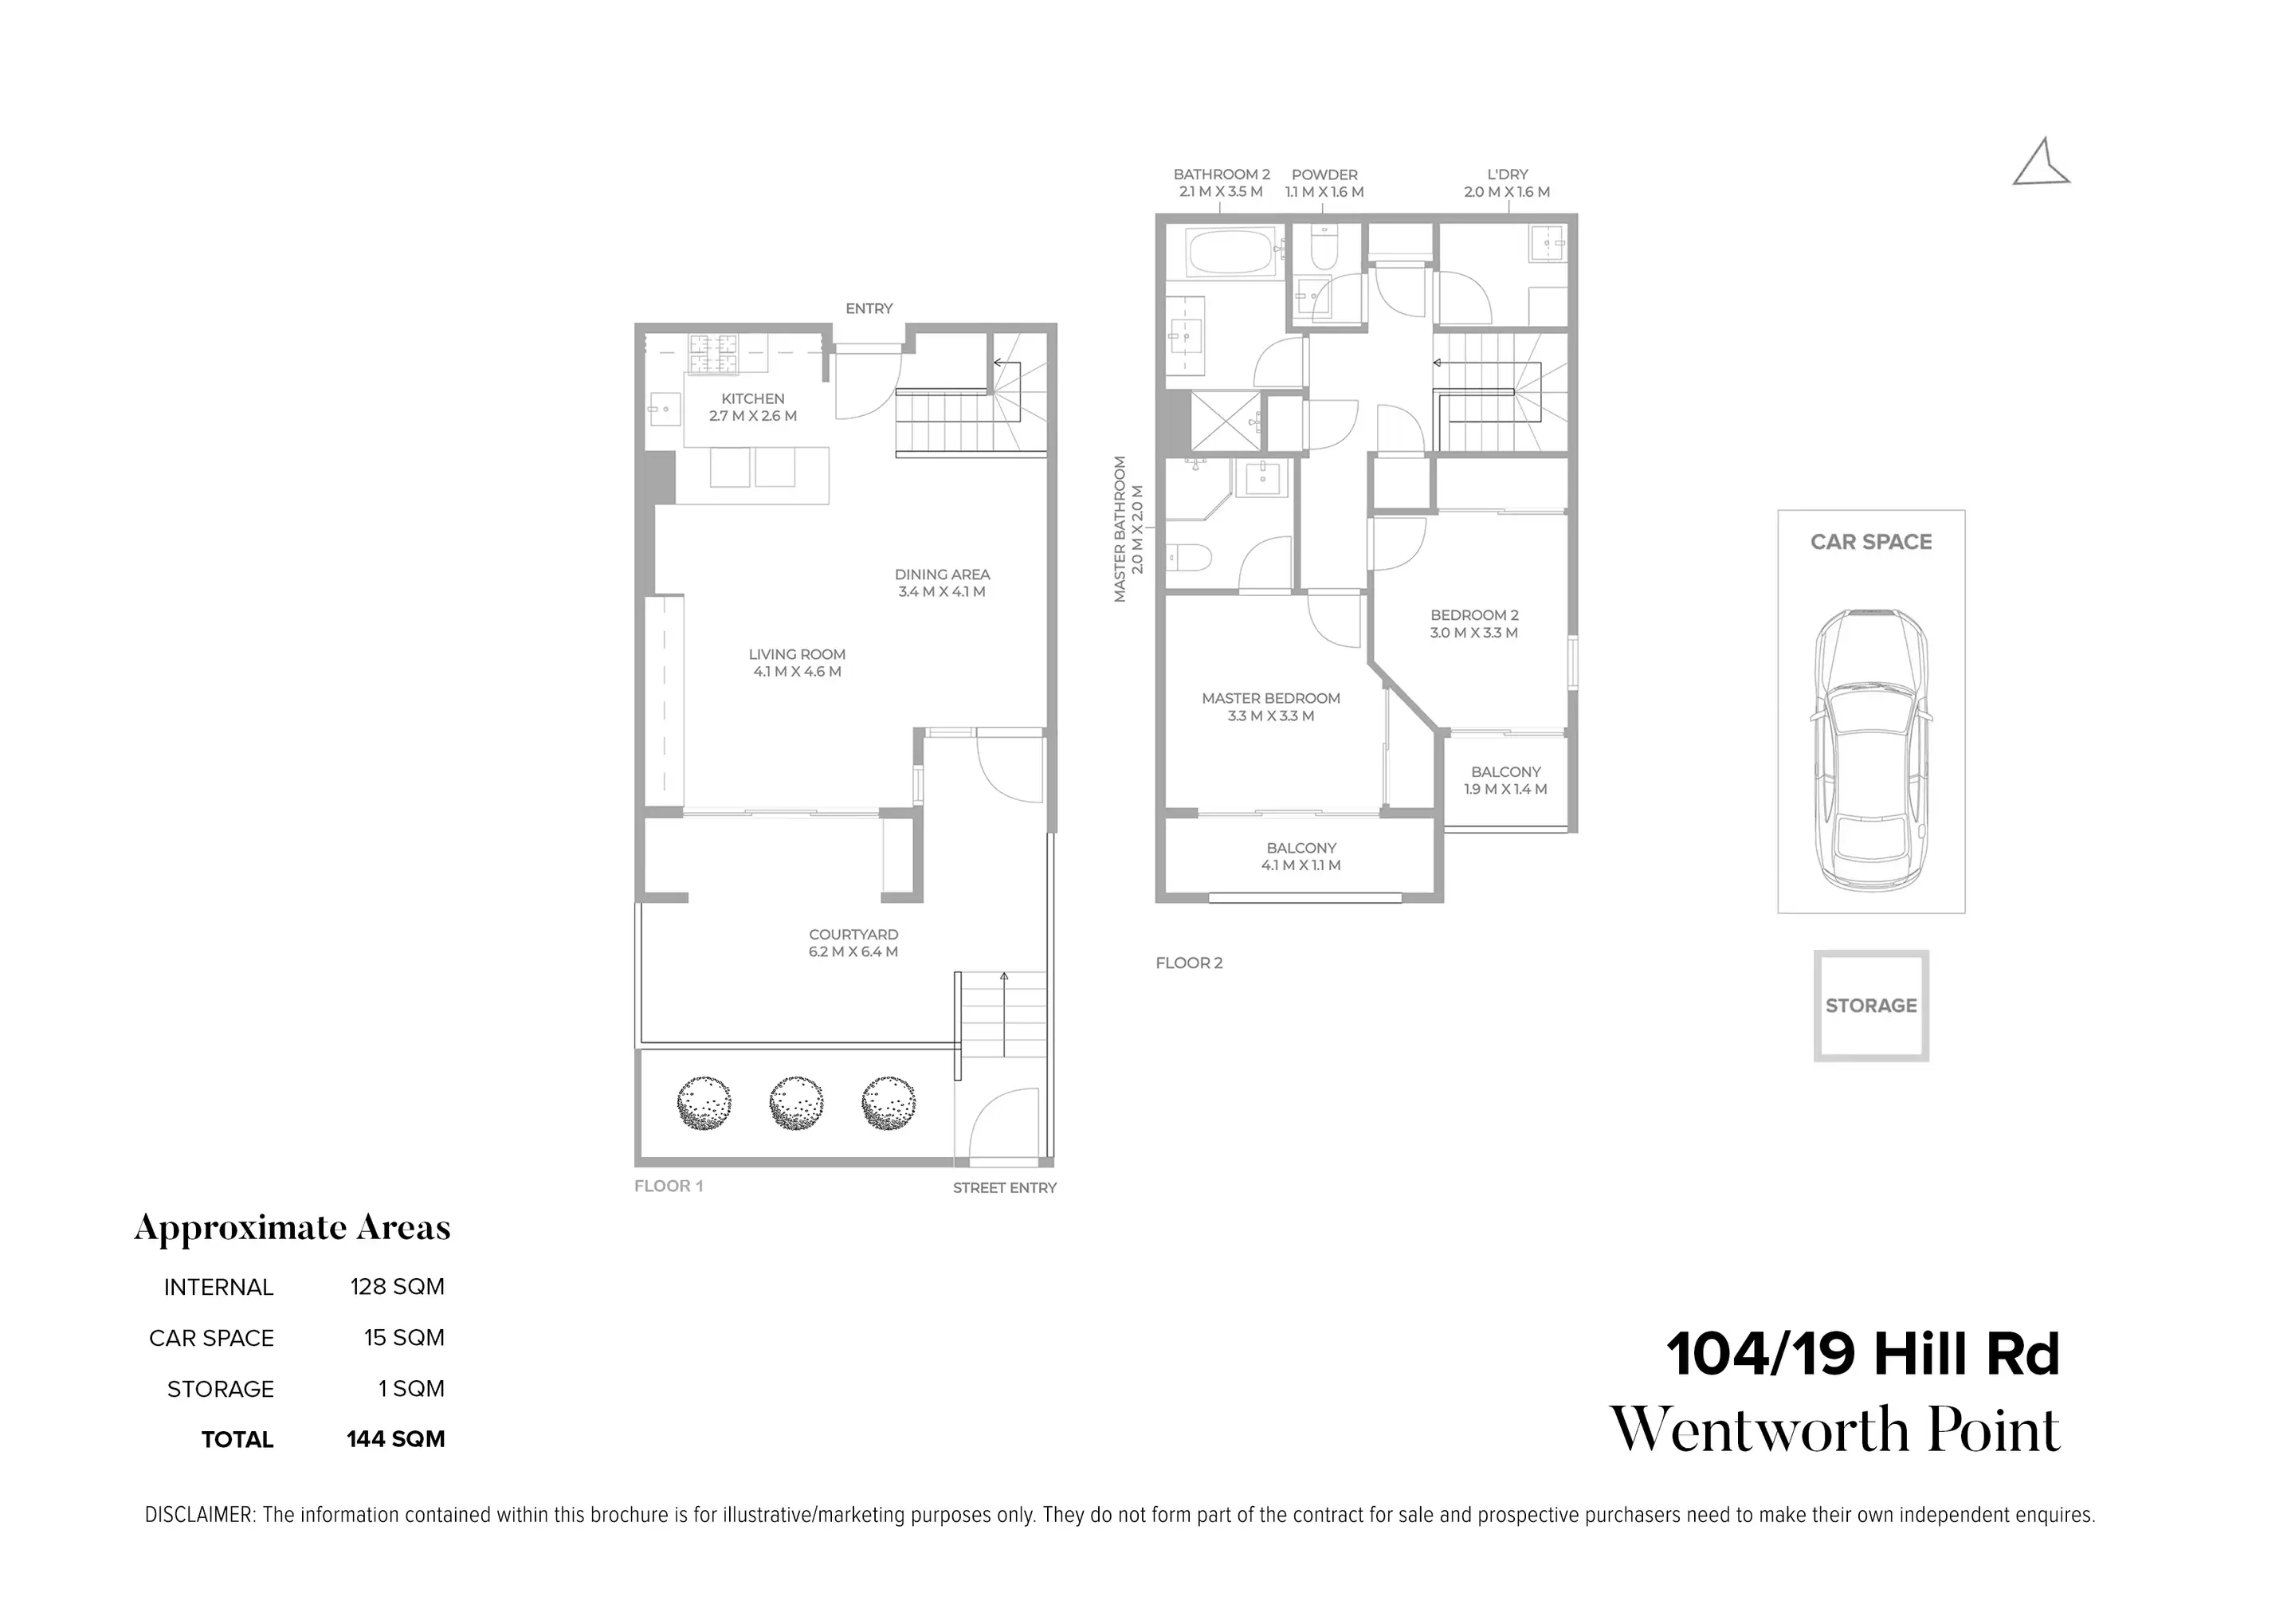 104/19 Hill Road, Wentworth Point For Sale by Chidiac Realty - floorplan